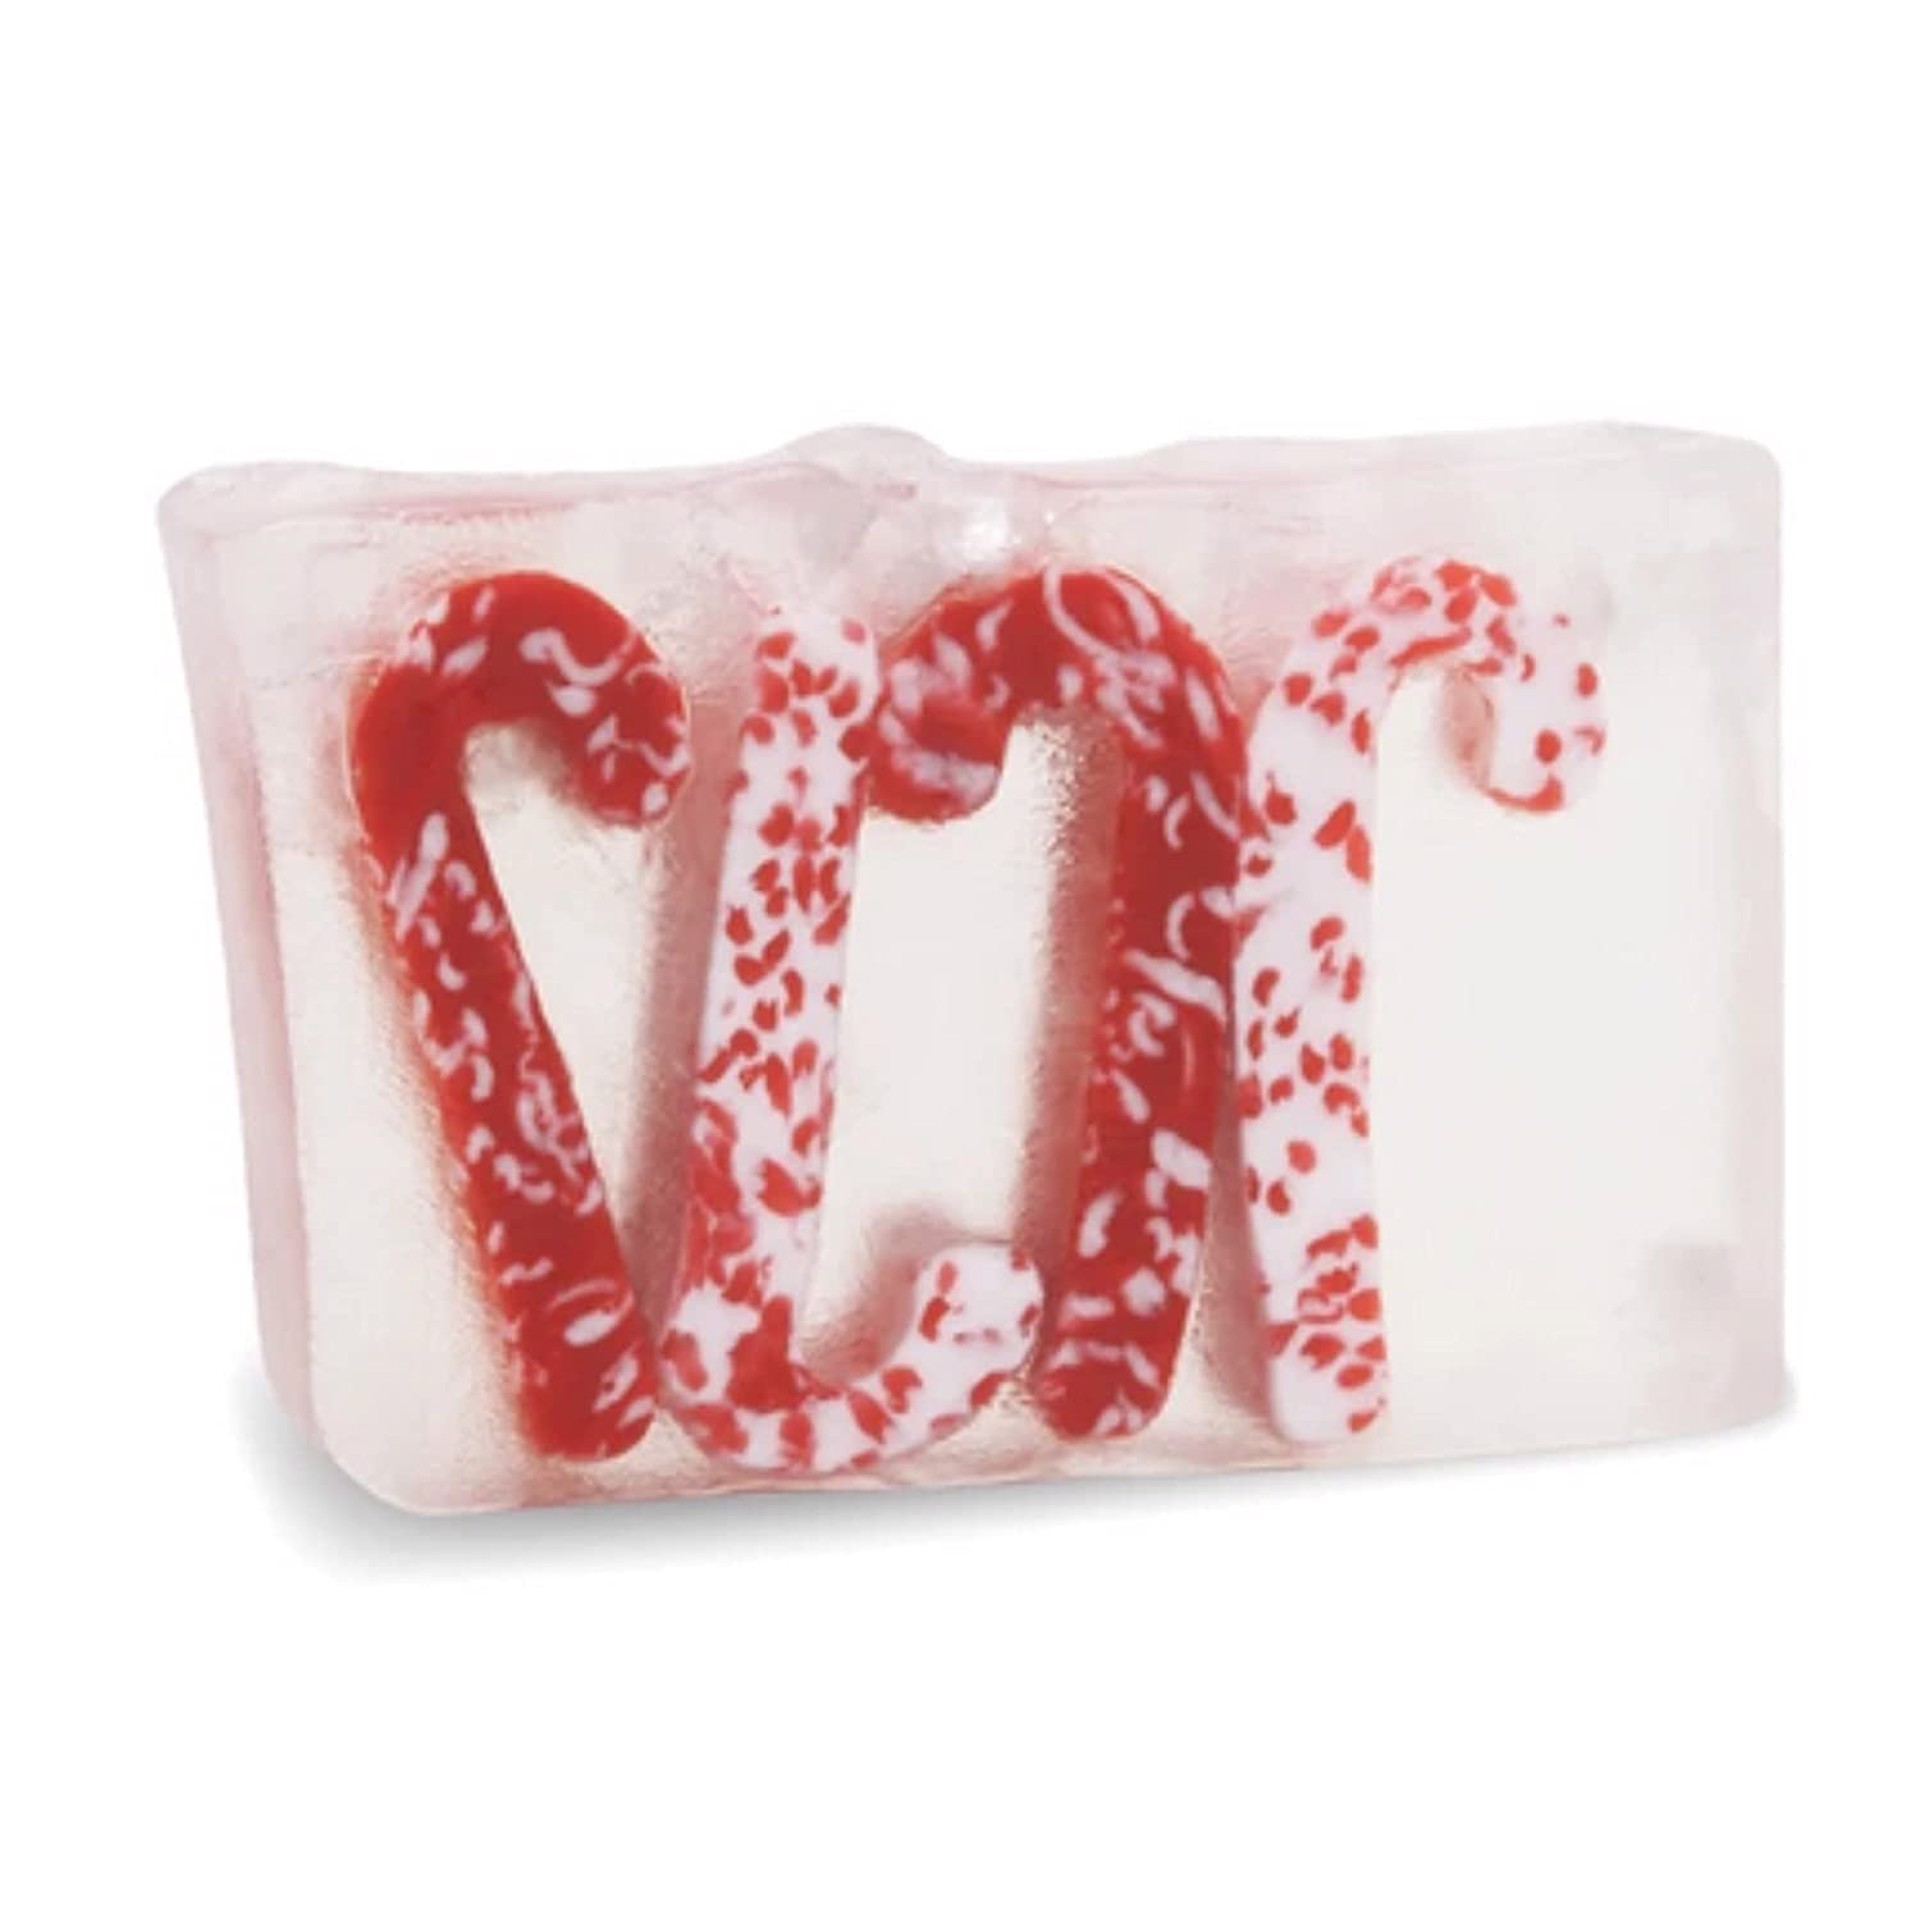 CANDY CANE:Handmade Soap by Primal Elements